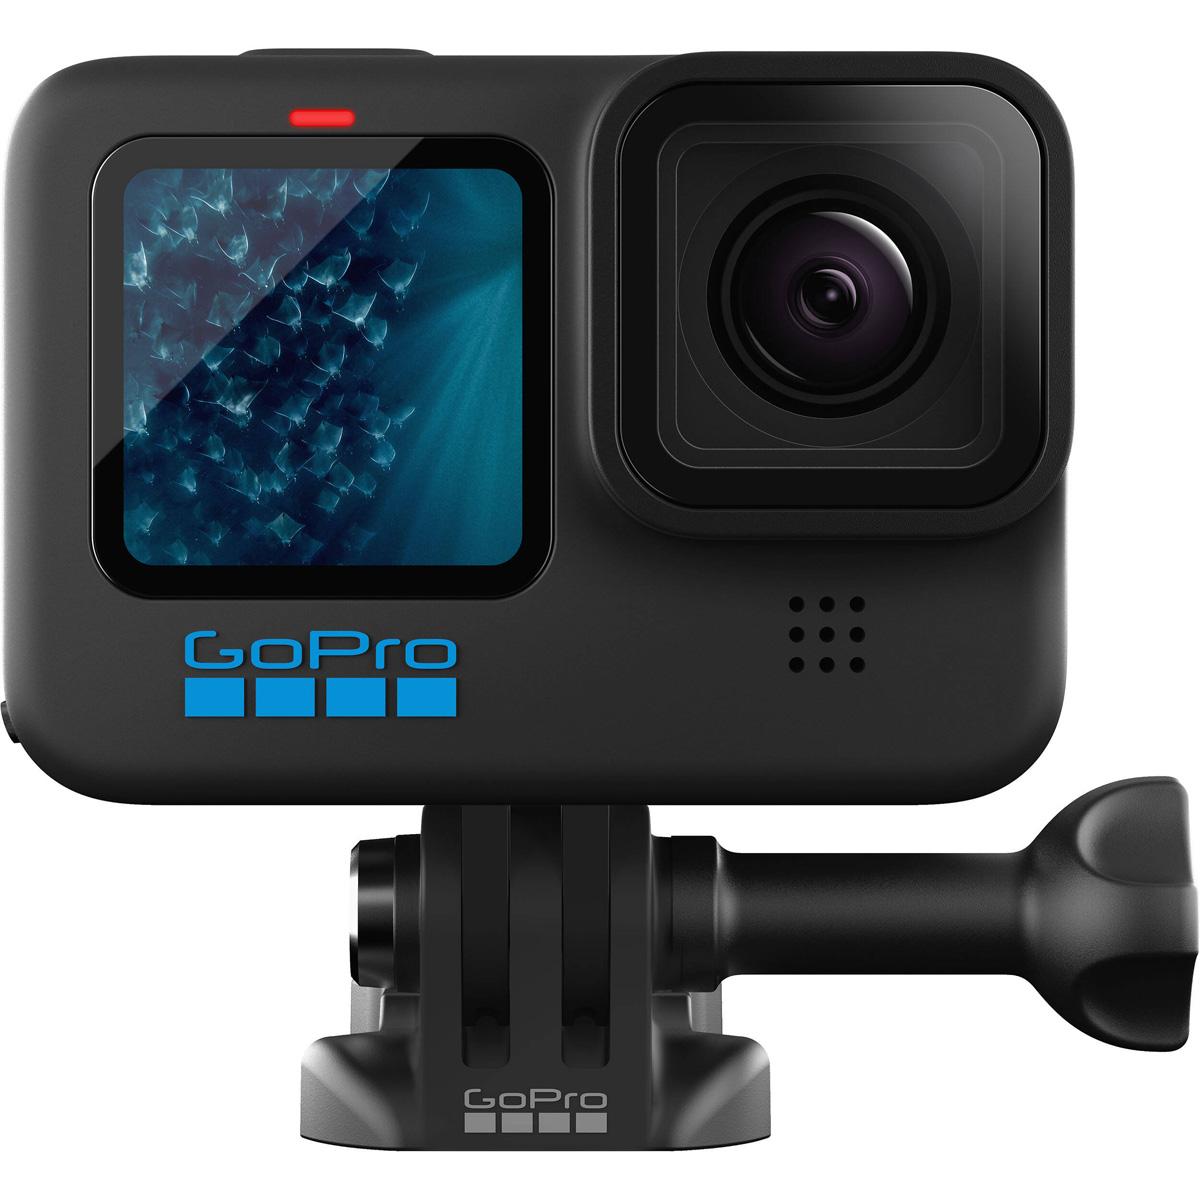 GoPro Hero11 Black Action Camera with GoPro Subscription for $359.98 Shipped